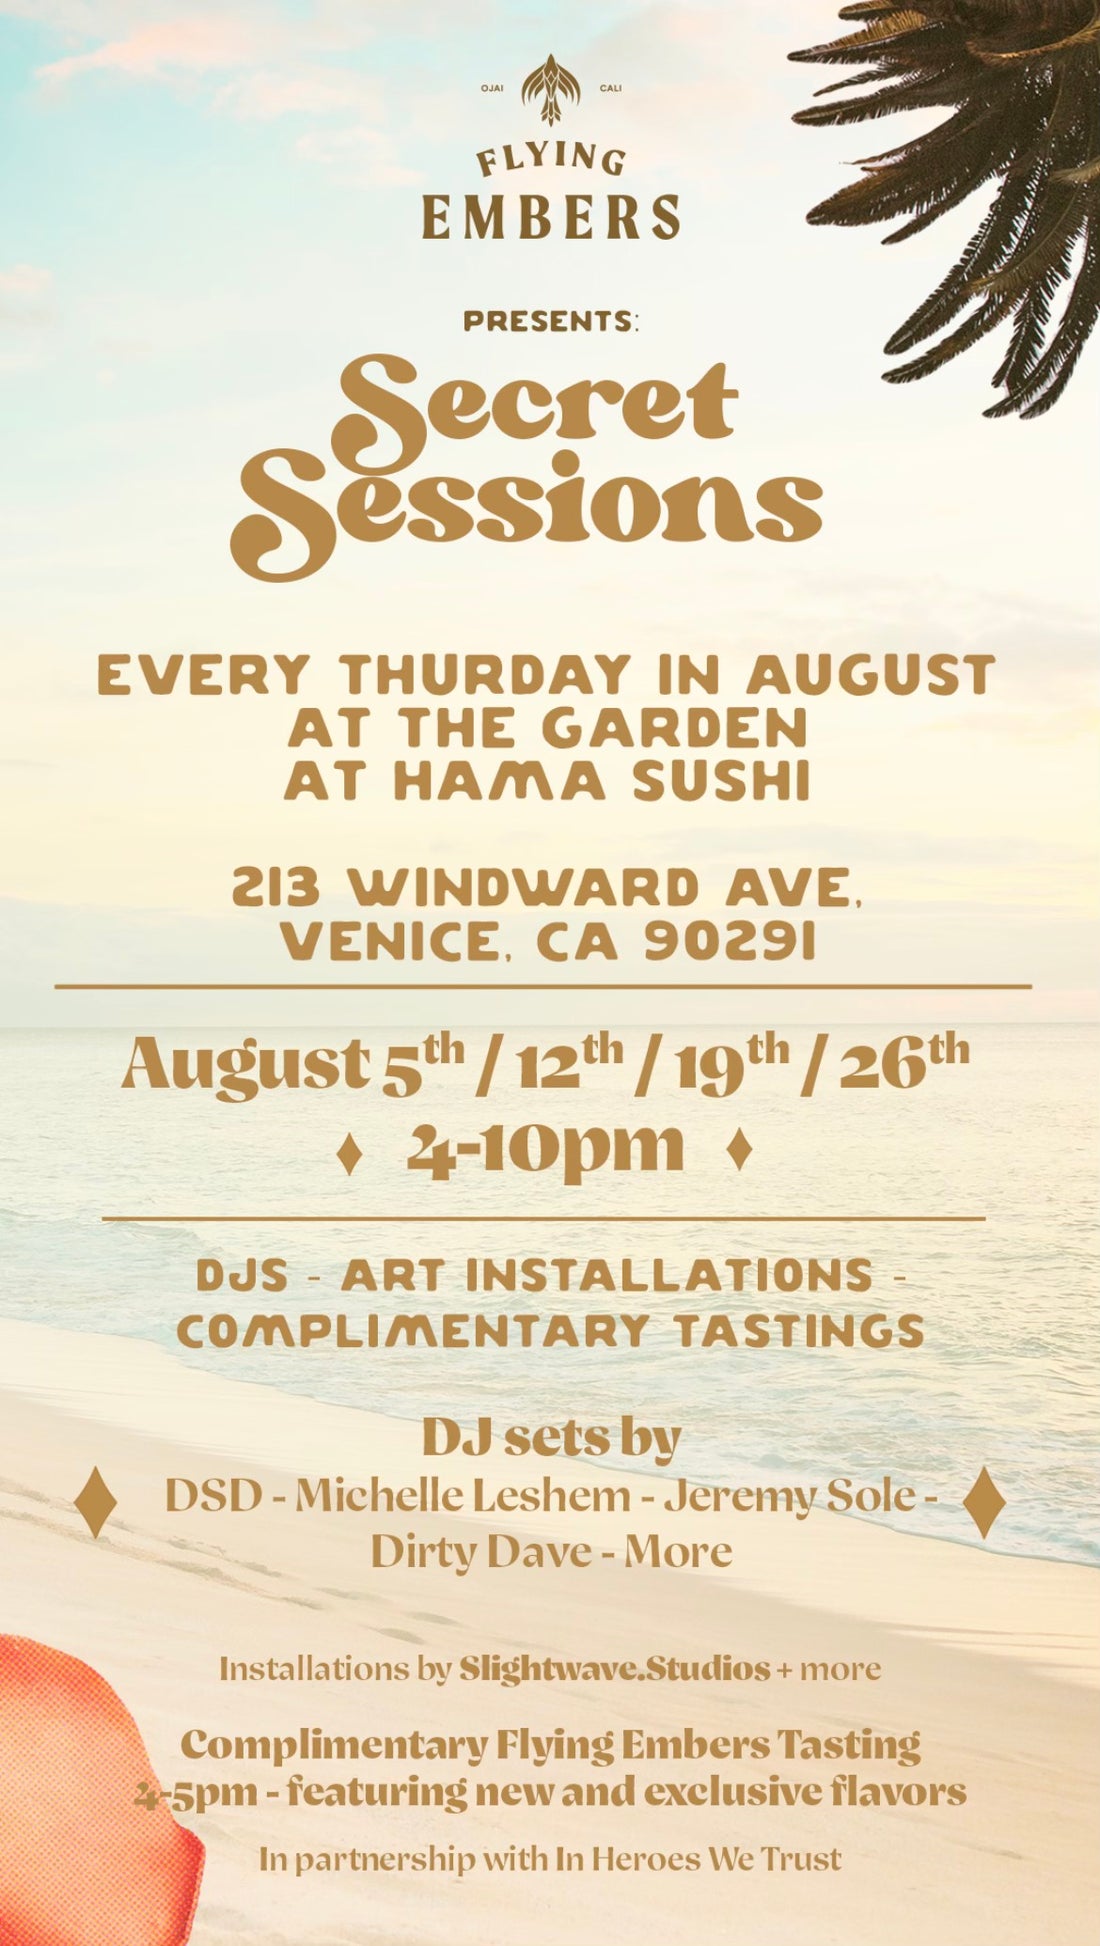 Flying Embers x IHWT x Hama Sushi Happy Hour Pop Up August 2021